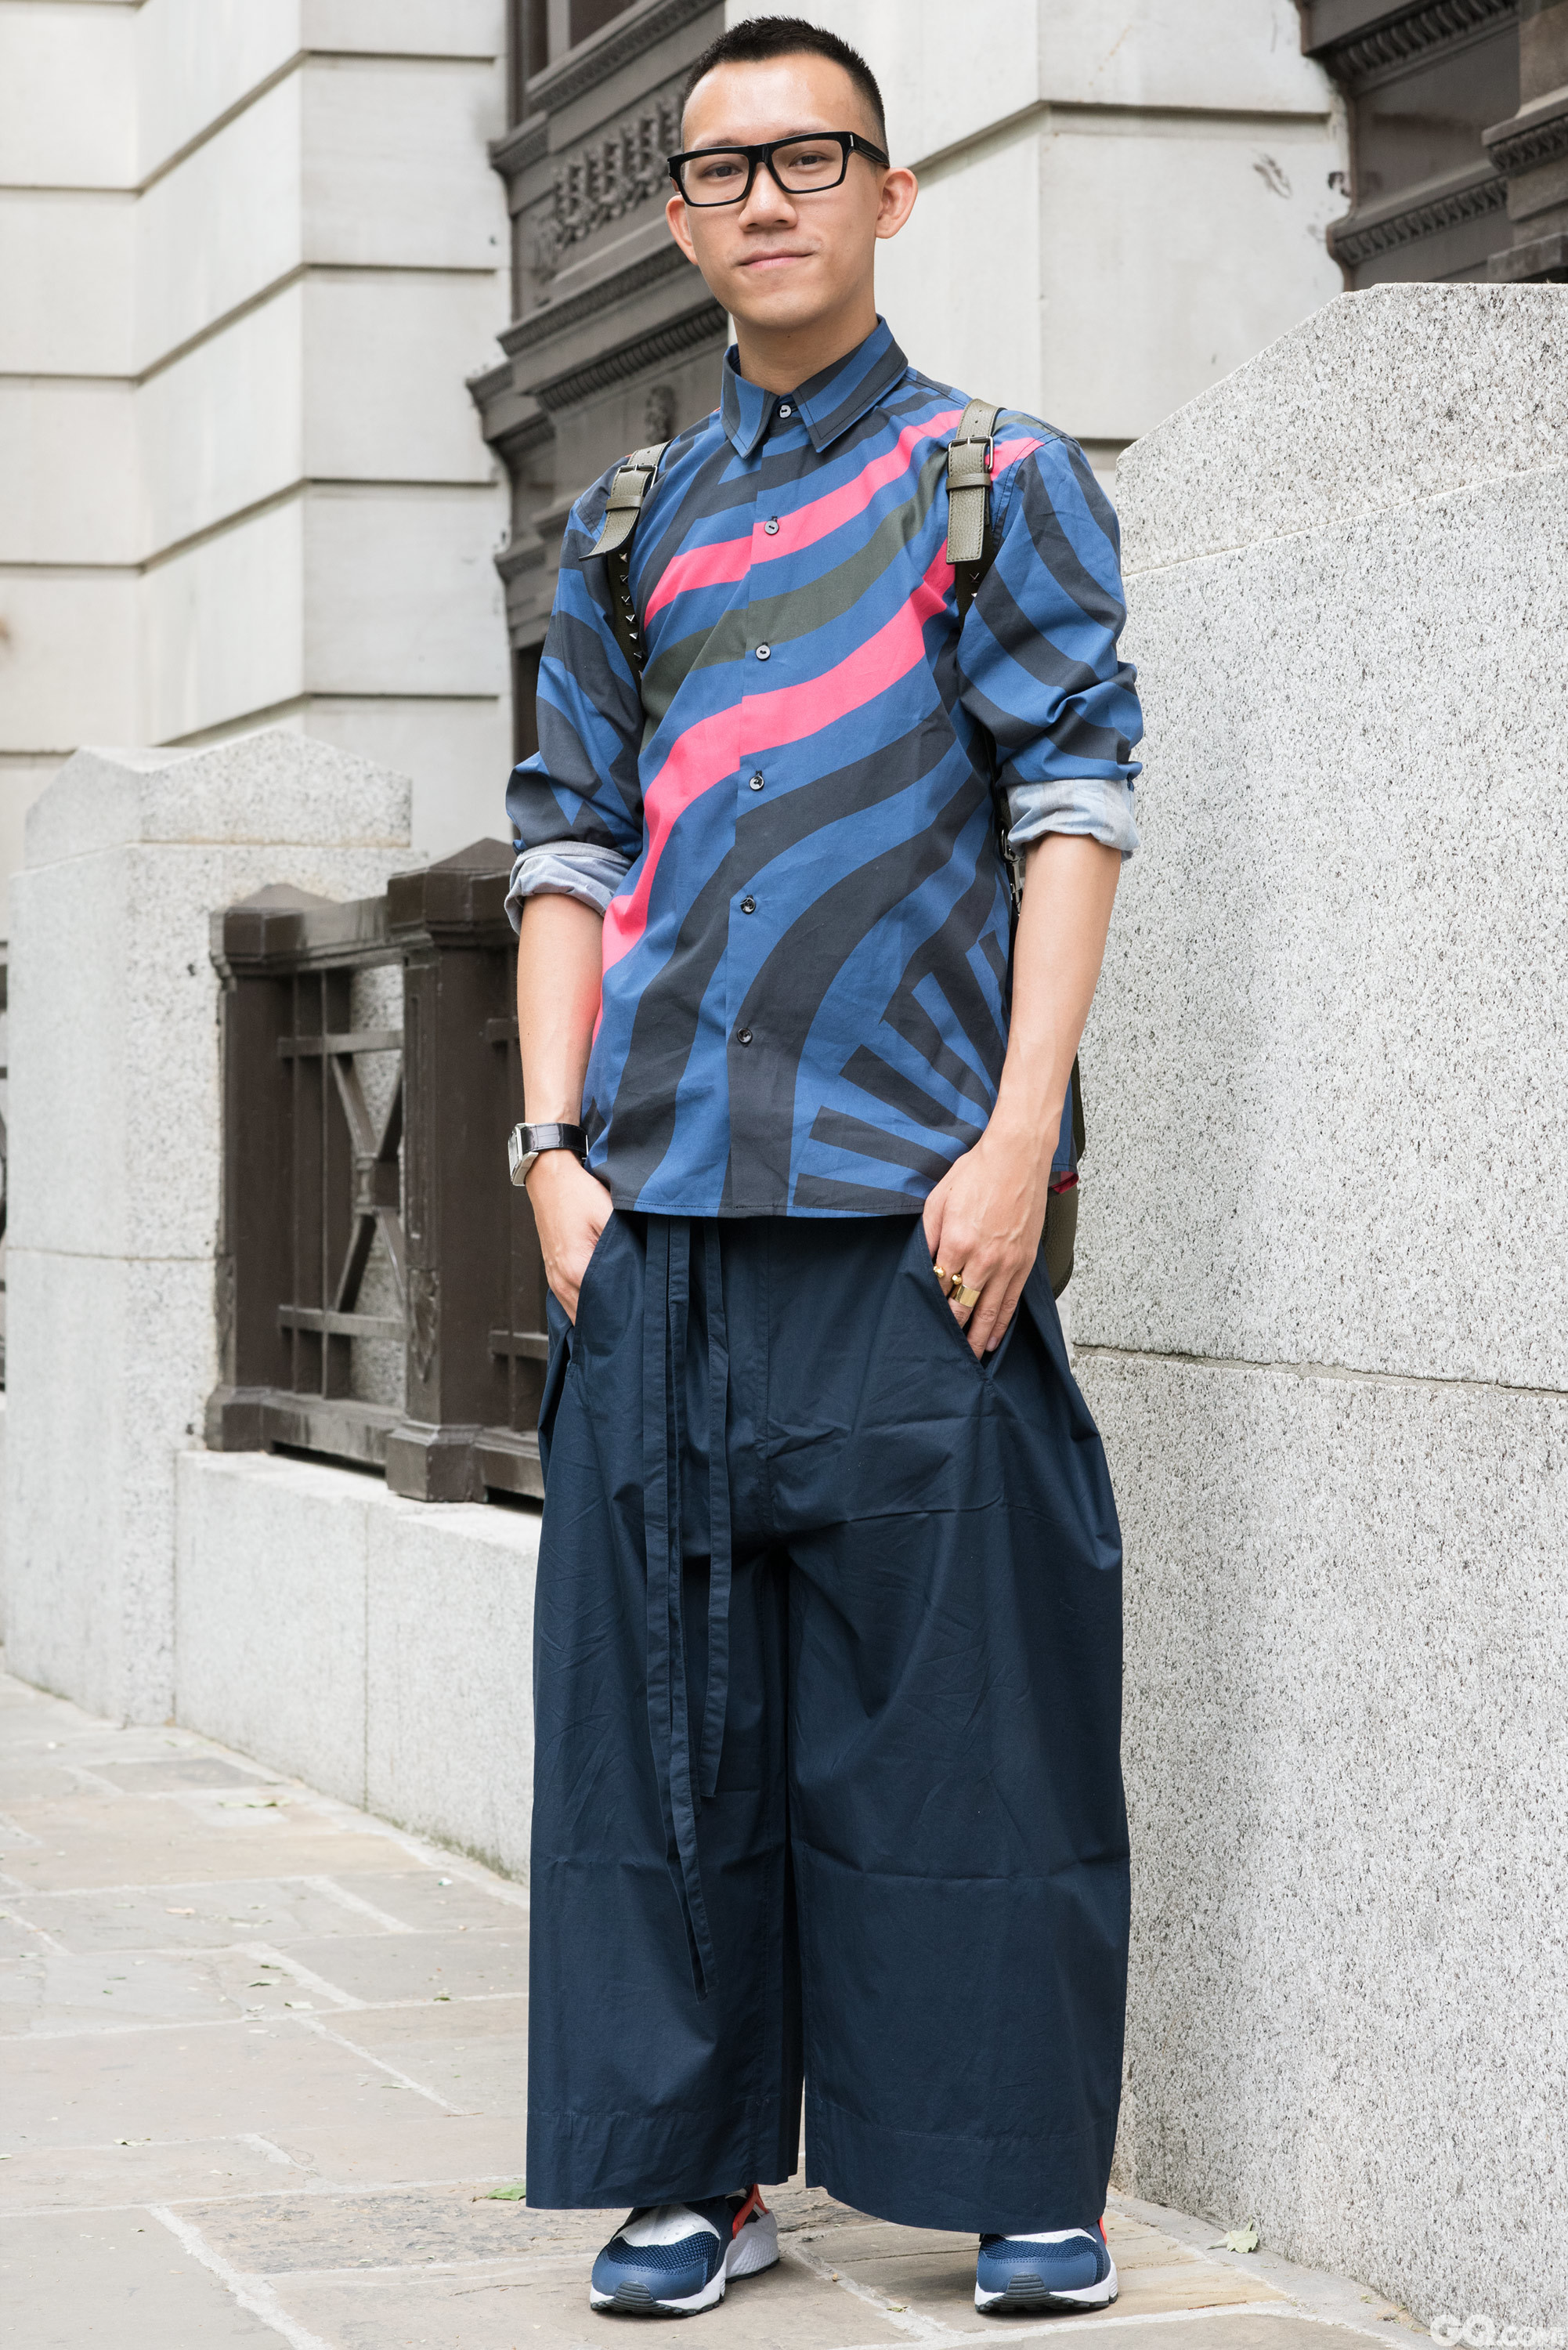 Marco
Shirt: House of Holland
Pants: Craig Green
Shoes: Nike
Bag: Valentino
Watch: Gaultier

Inspiration: Today was a little random, it’s the first day. I went with the pants because they’re cool and I wanted something that matches the navy. But not something boring so I got a print. 今天是一天所以有些混搭，今天我穿了这条裤子因为它非常酷，同时我想找一些不那么无聊的印花来搭配海军蓝色。